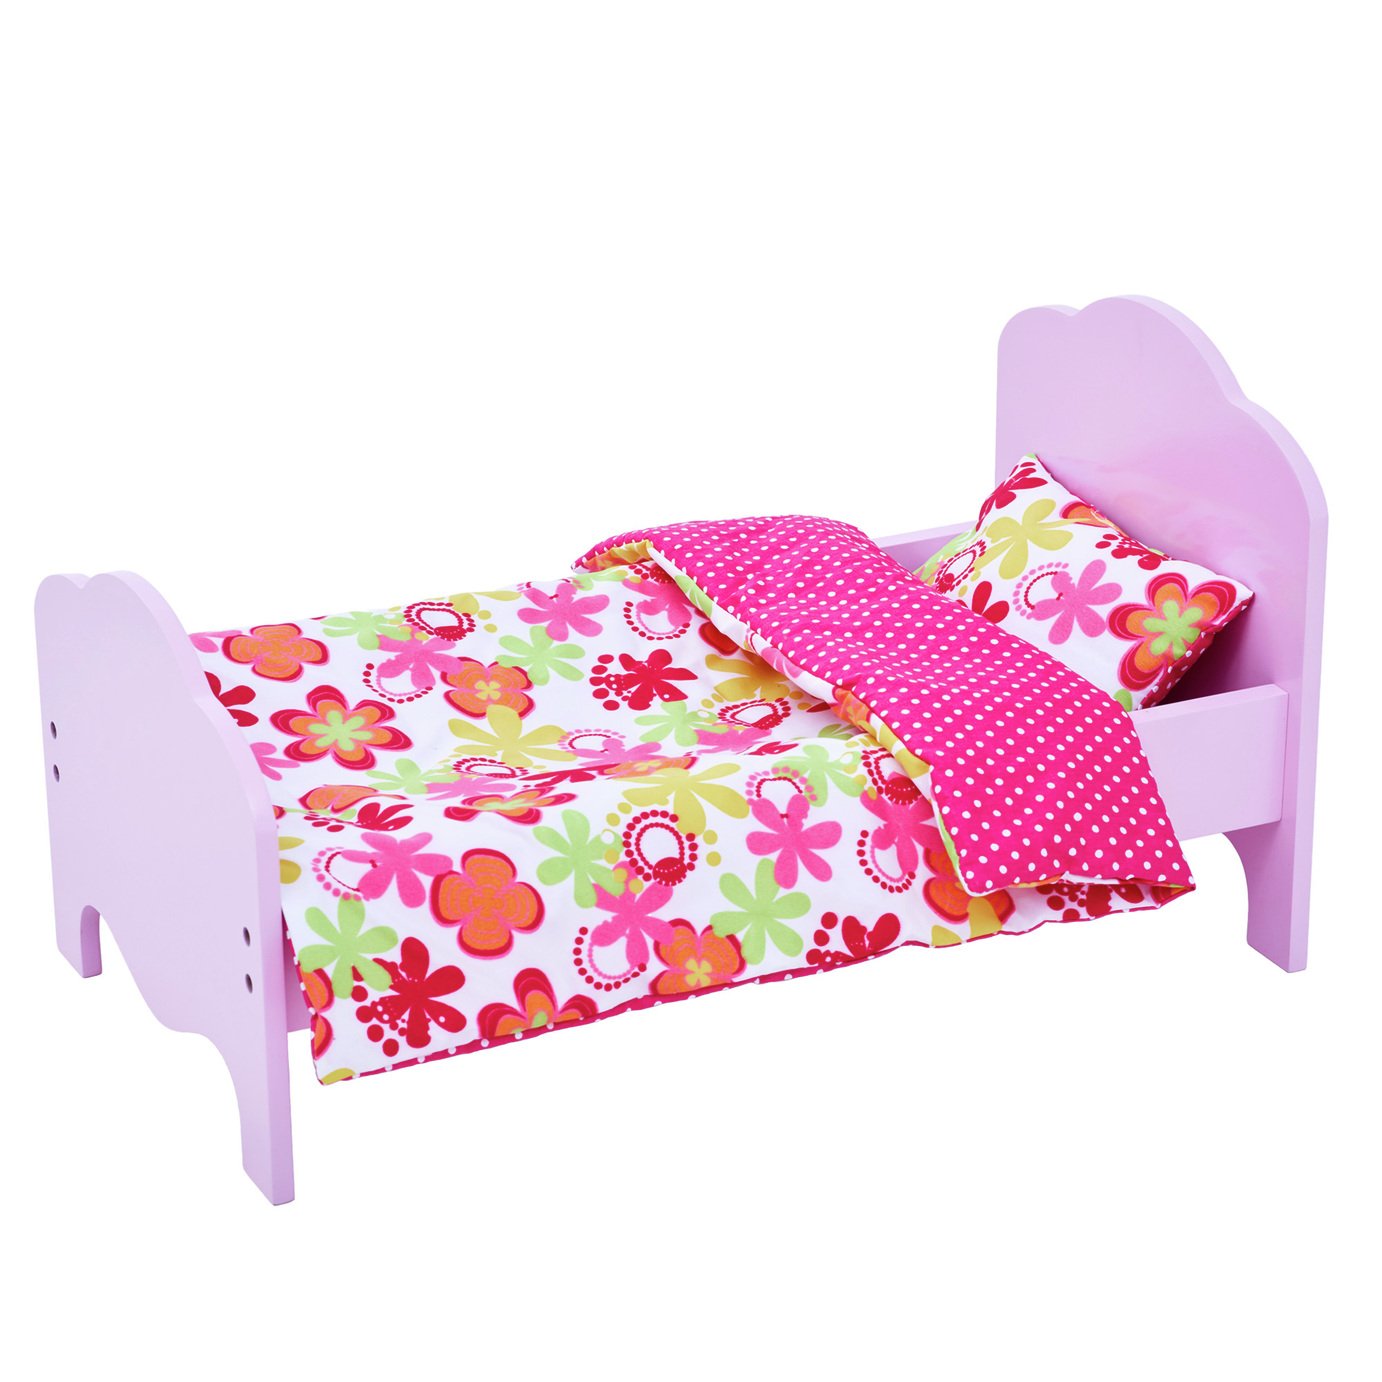 Olivia's Little World Princess Doll and Bed - Summer Flowers